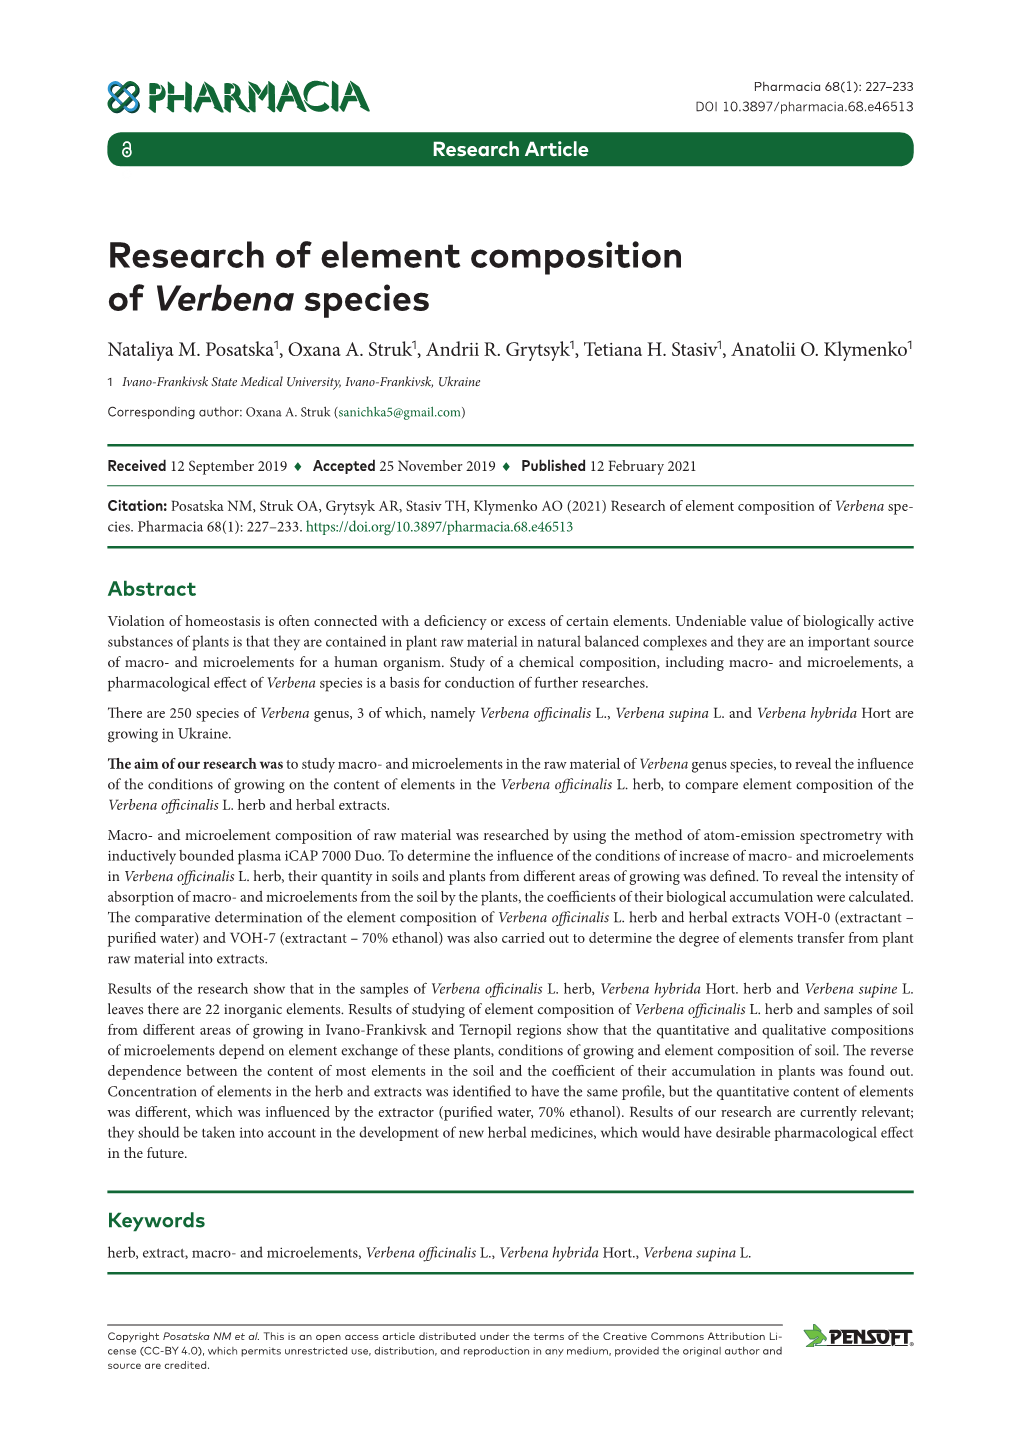 ﻿Research of Element Composition of Verbena Species